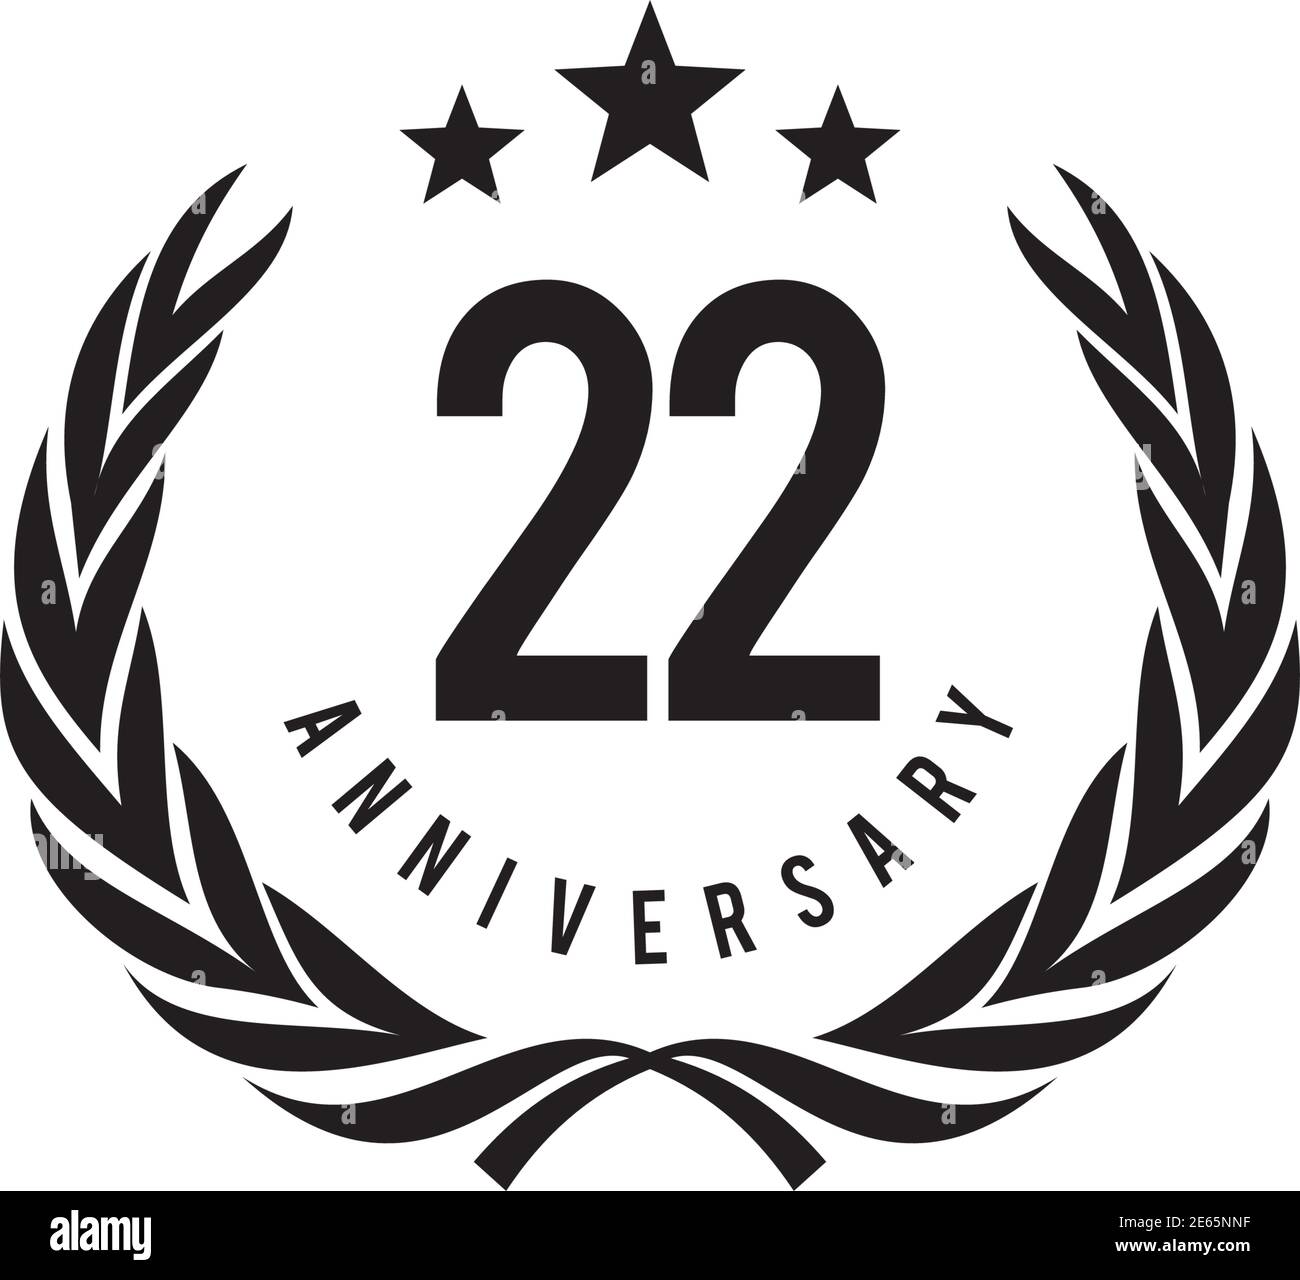 22nd Year Anniversary Logo Design Vector Template Stock Vector Image